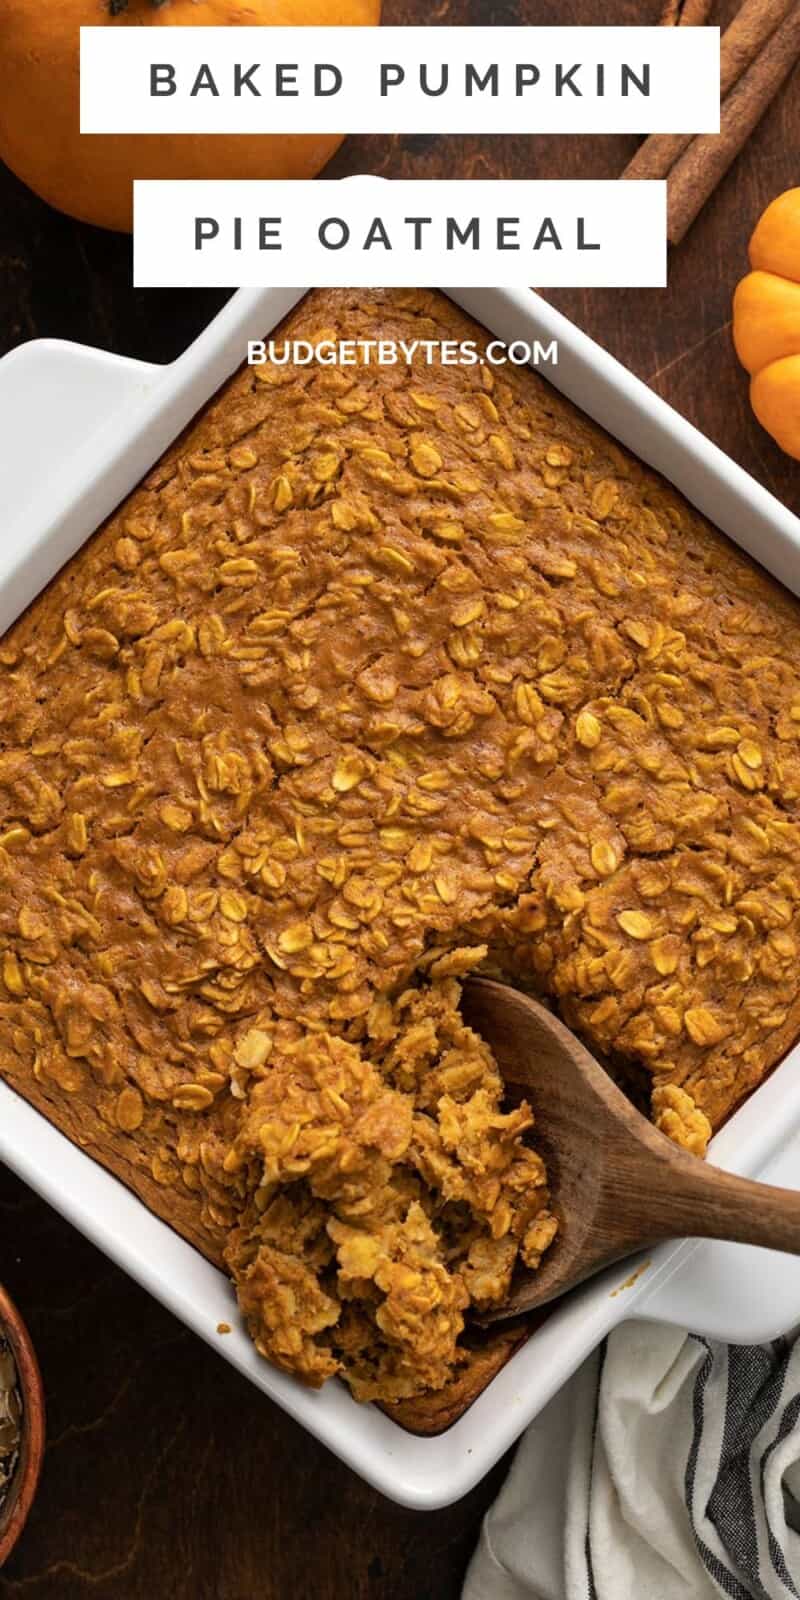 Overhead view of a square baking dish full of baked pumpkin pie oatmeal.